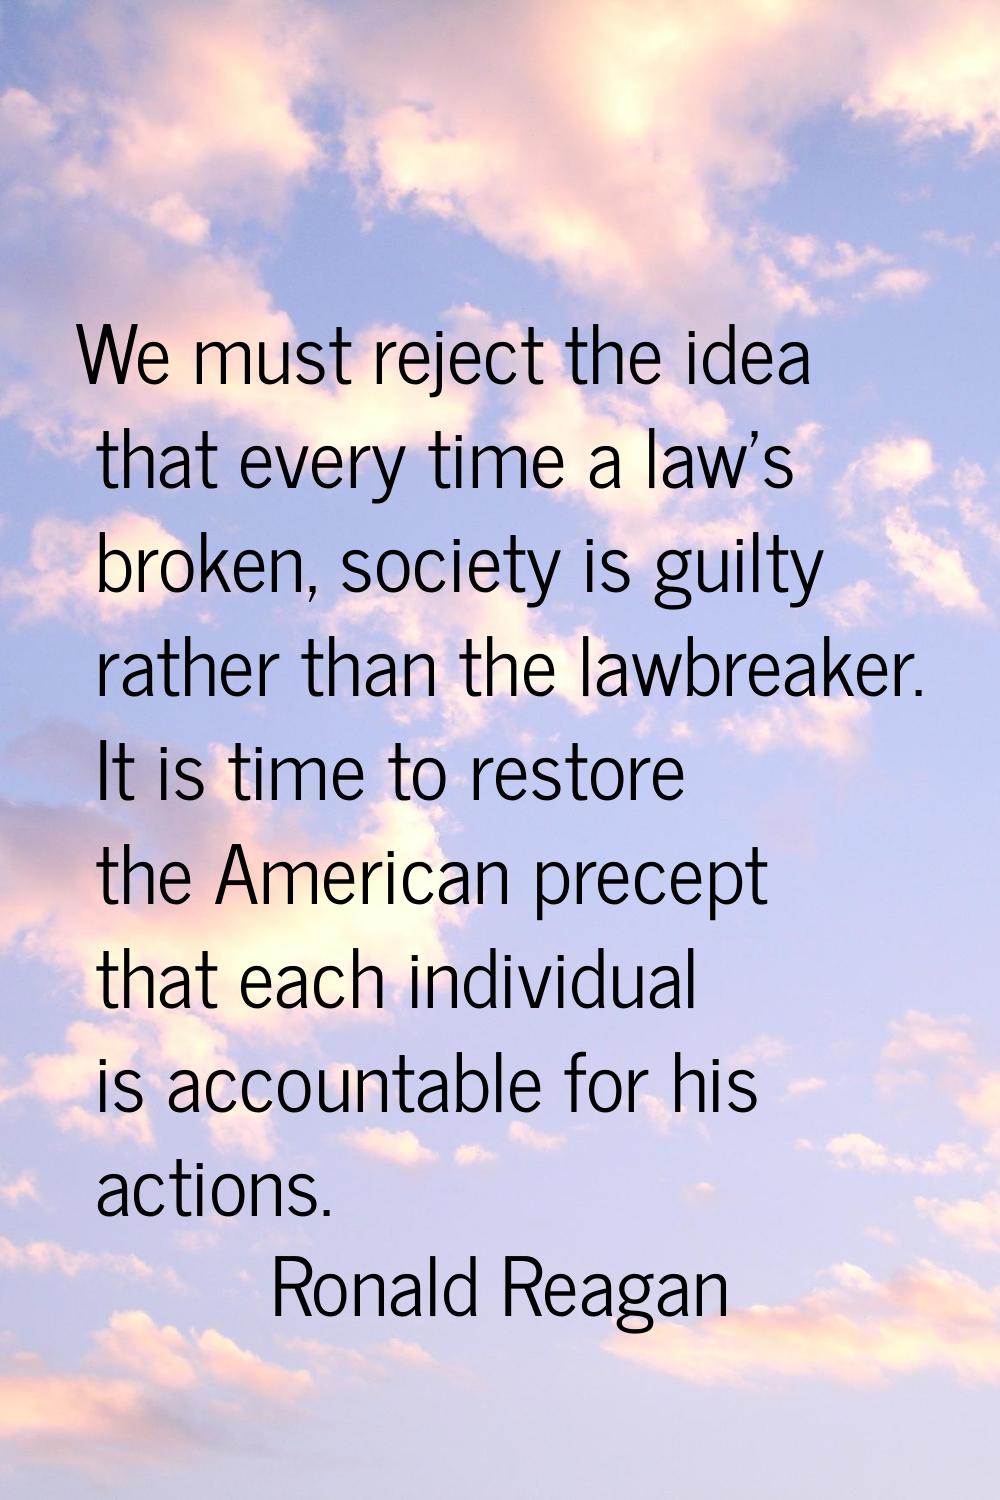 We must reject the idea that every time a law's broken, society is guilty rather than the lawbreake